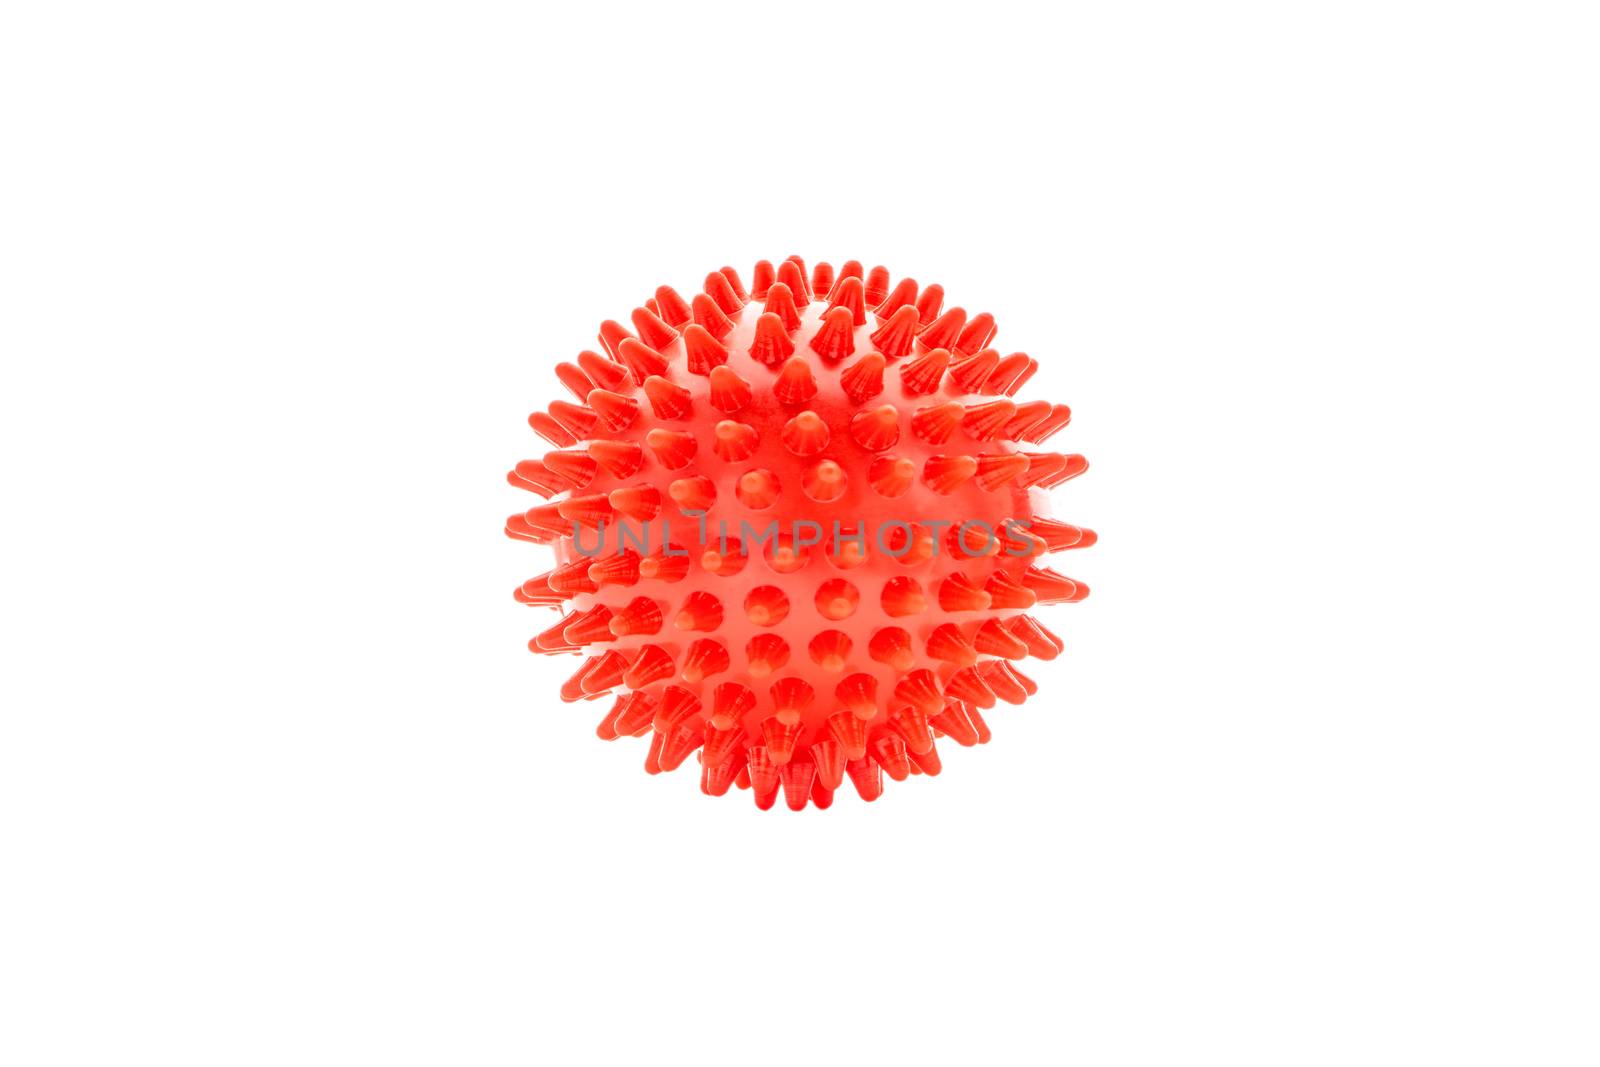 Massage ball or rubber spike ball isolated on white background. Healthcare, self massage and reflexology therapy concept